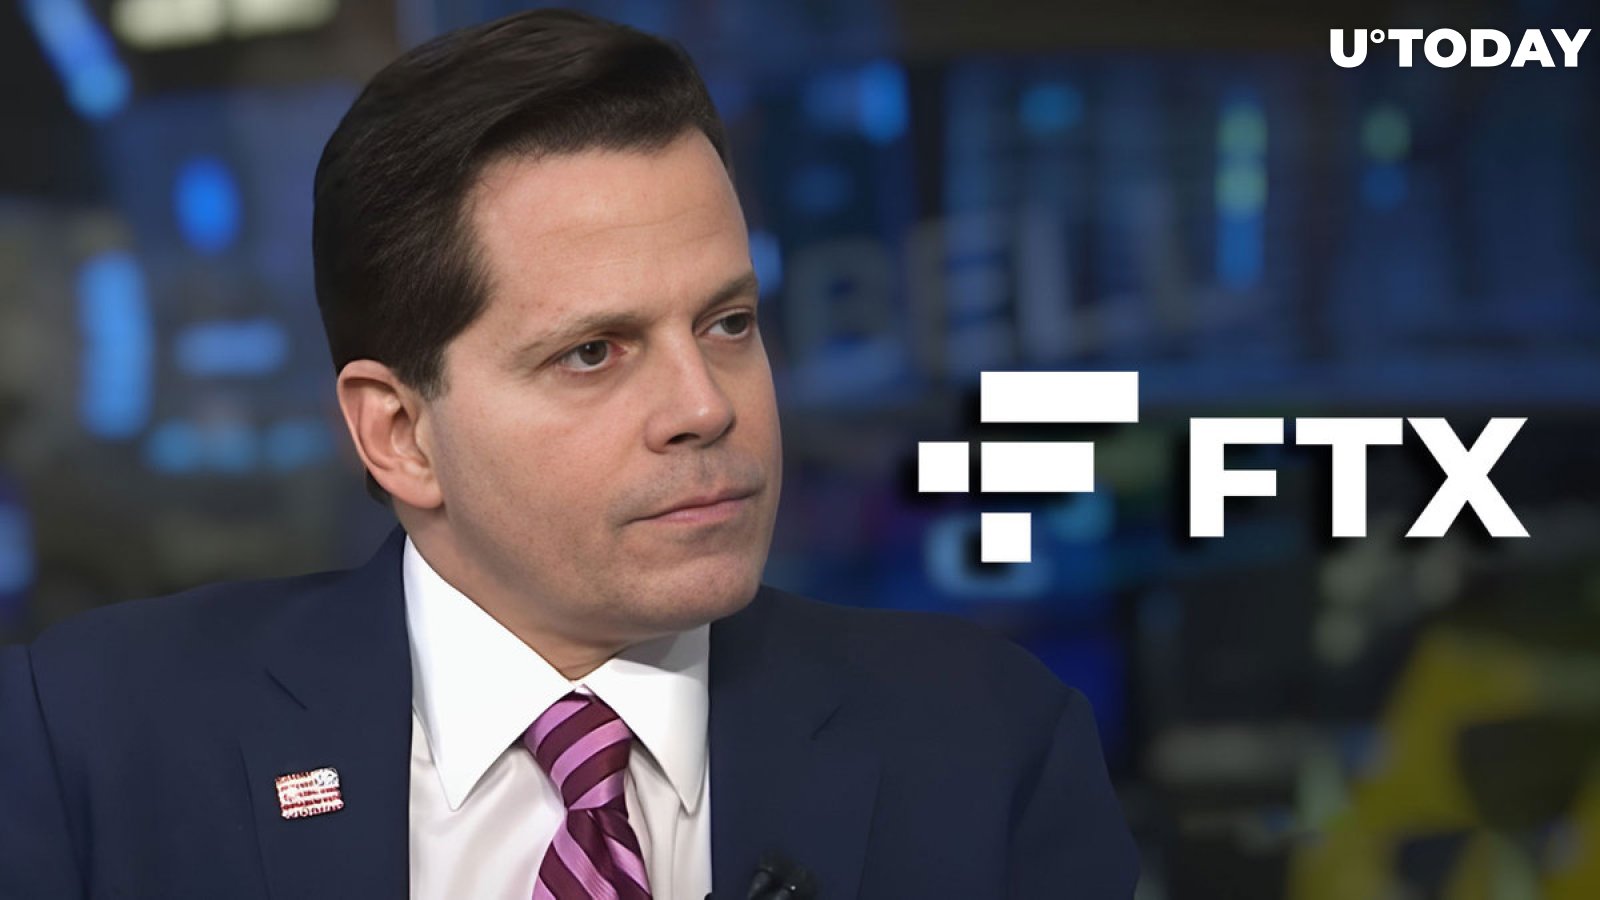 FTX: Anthony Scaramucci Weighs in on Exchange's Uncertain Future